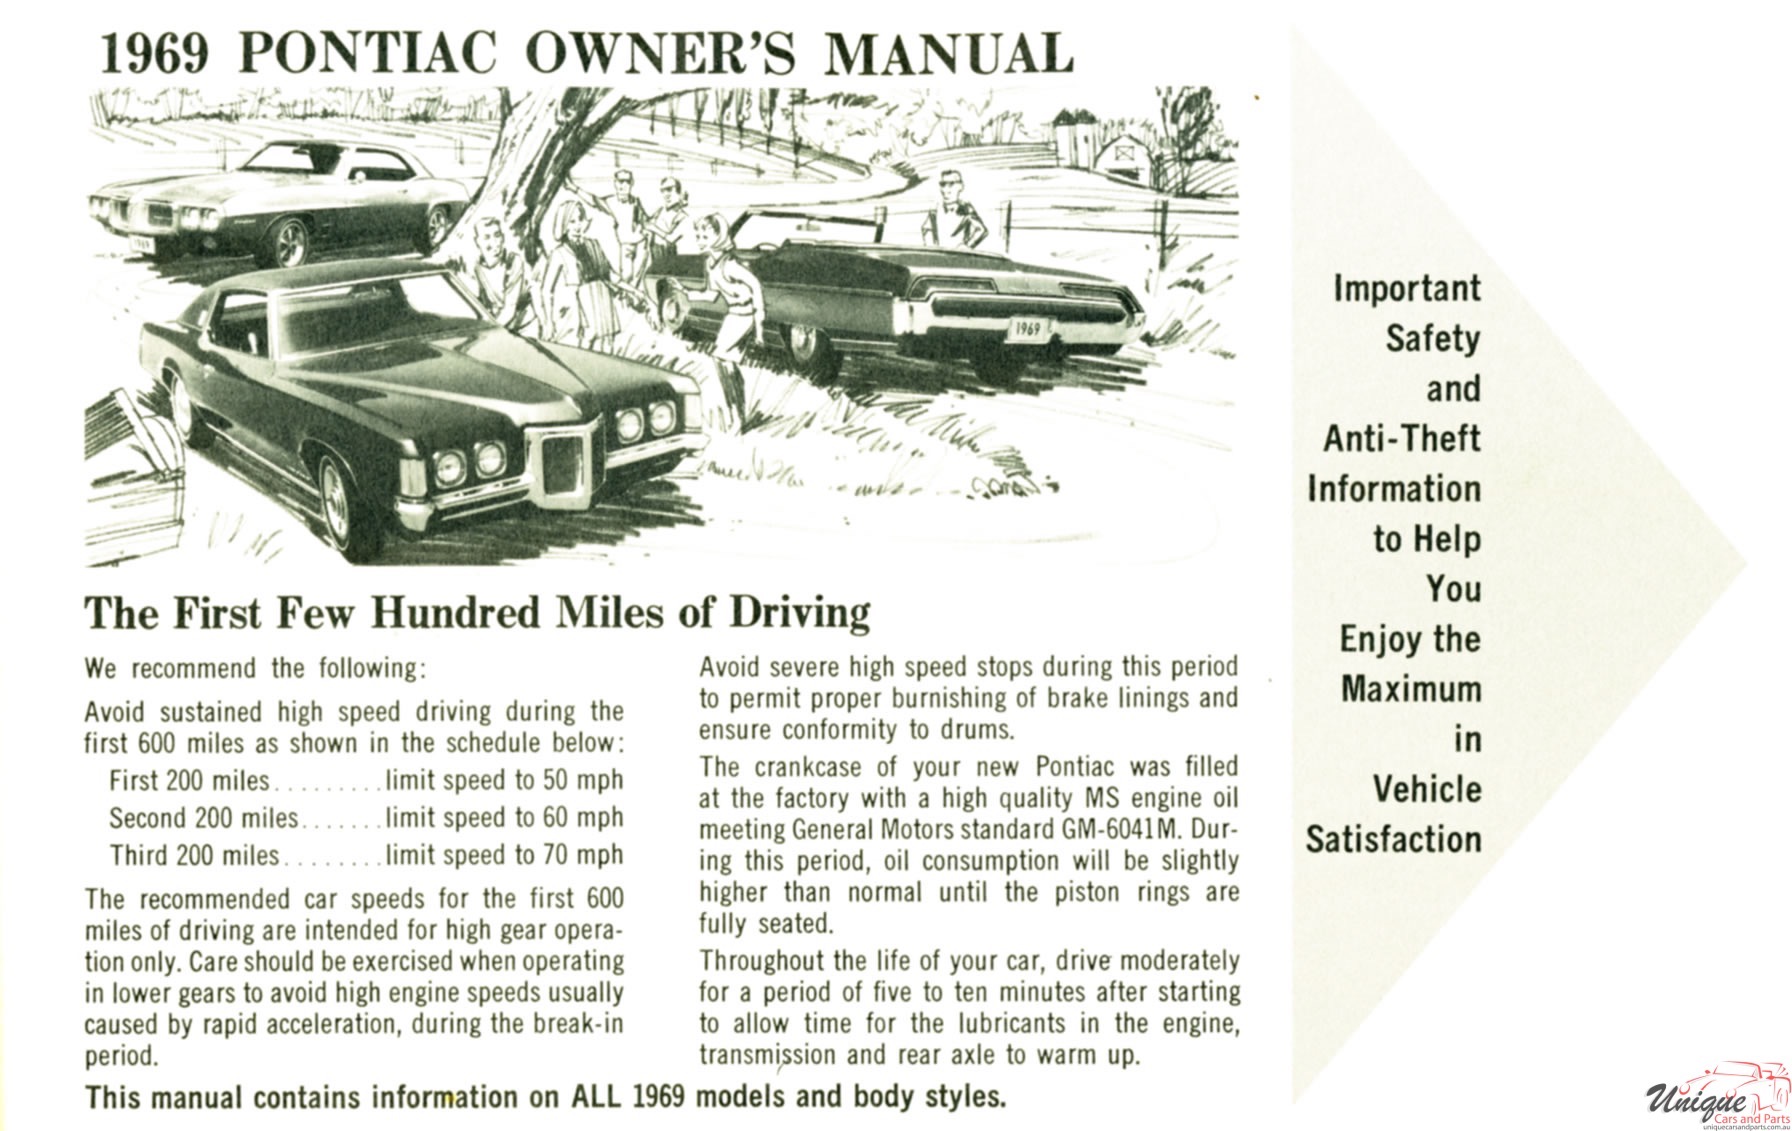 1969 Pontiac Owners Manual Page 11